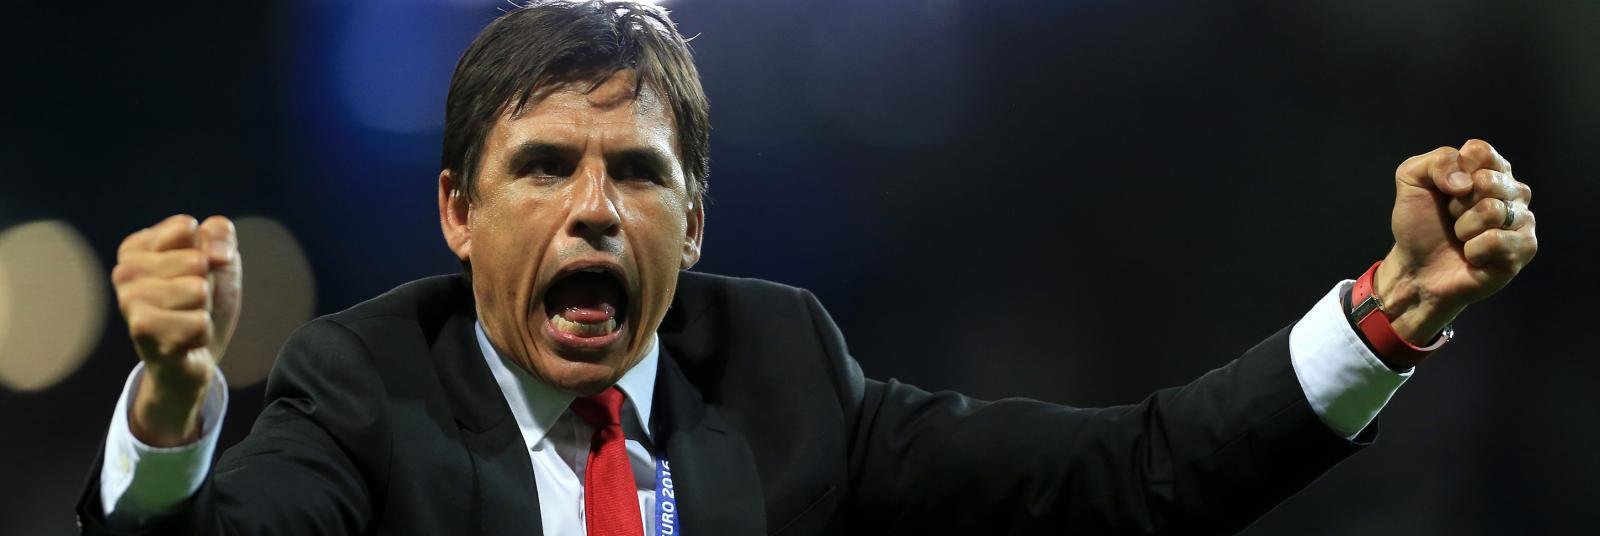 Chris Coleman: 2018 World Cup campaign will be my last as Wales boss